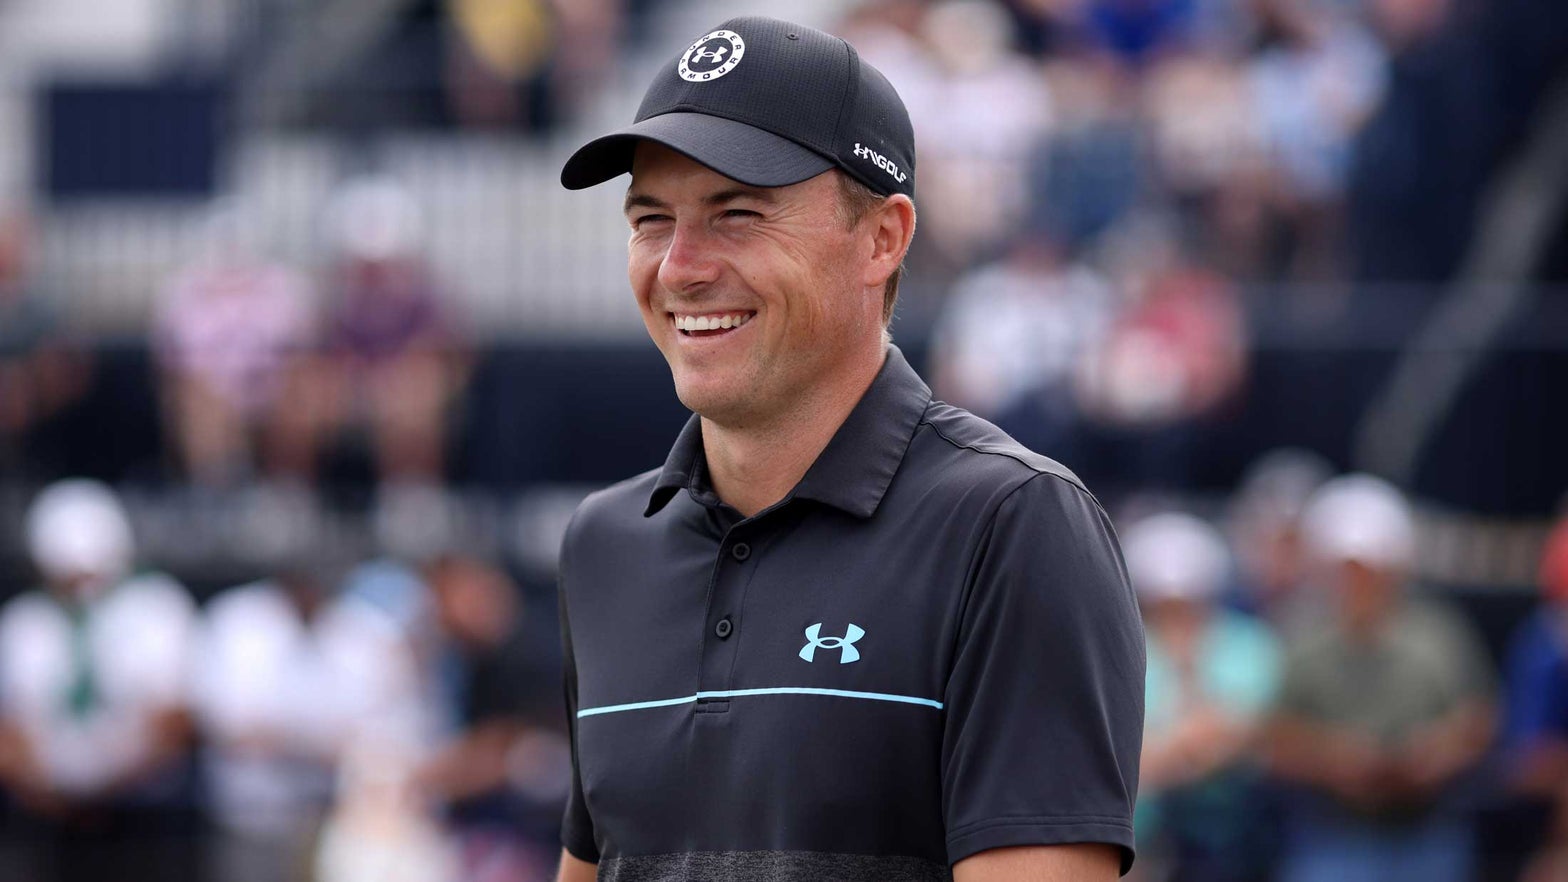 British Open expert picks to win, sleepers to watch at St. Andrews